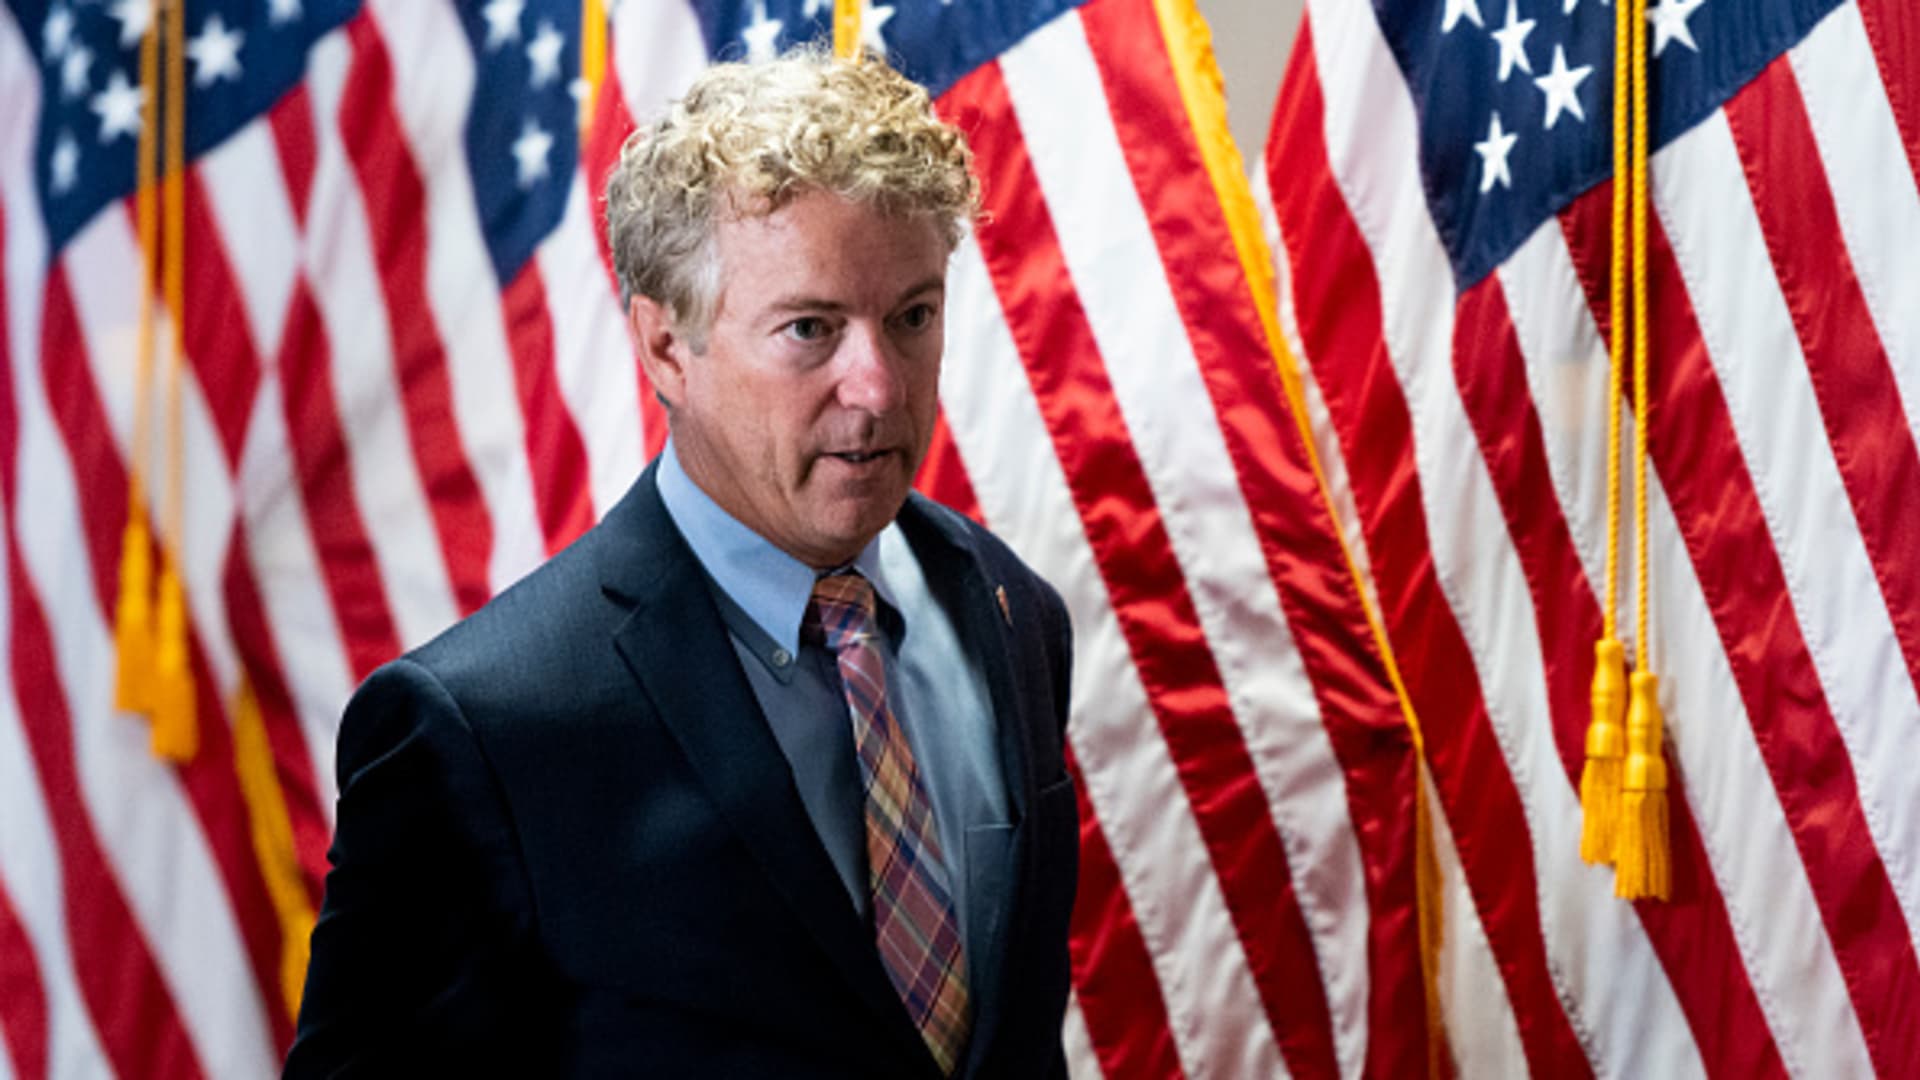 Sen Rand Paul, R-Ky., blocked the U.S. Senate on May 12, 2022 from passing a nearly $40 billion assistance bill designed to bolster Ukraine's fight against a Russian invasion. (Photo By Bill Clark/CQ-Roll Call, Inc via Getty Images)